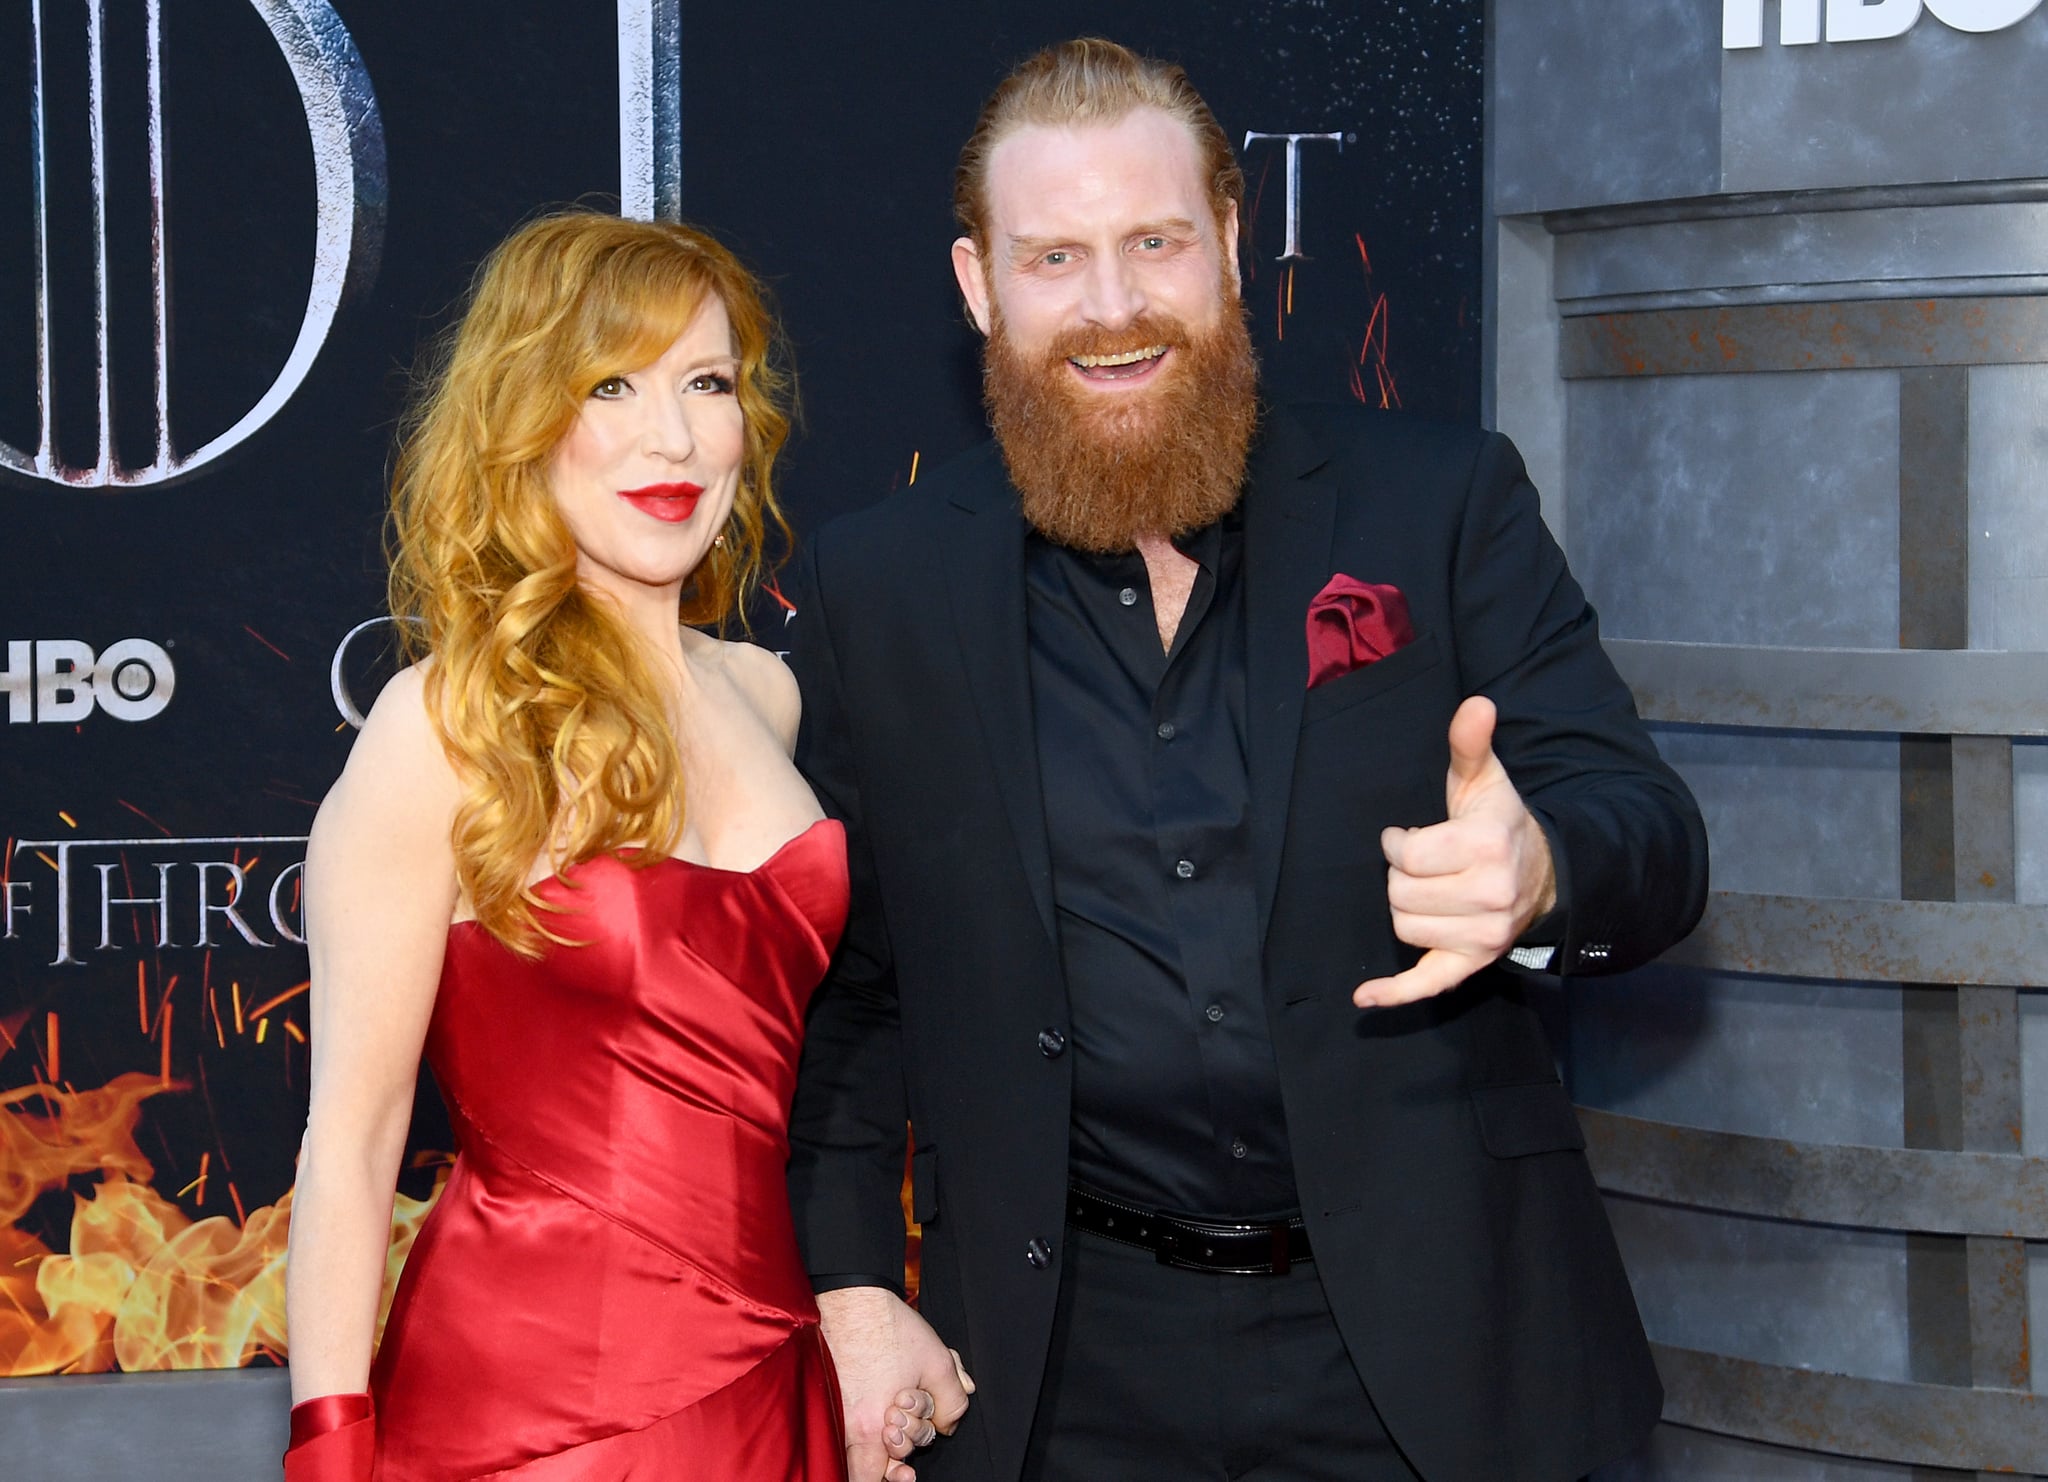 Gry Molvaer Hivju And Kristofer Hivju We Re Emotional Past And Present Game Of Thrones Stars Gather At The Final Red Carpet Premiere Popsugar Celebrity Photo 48